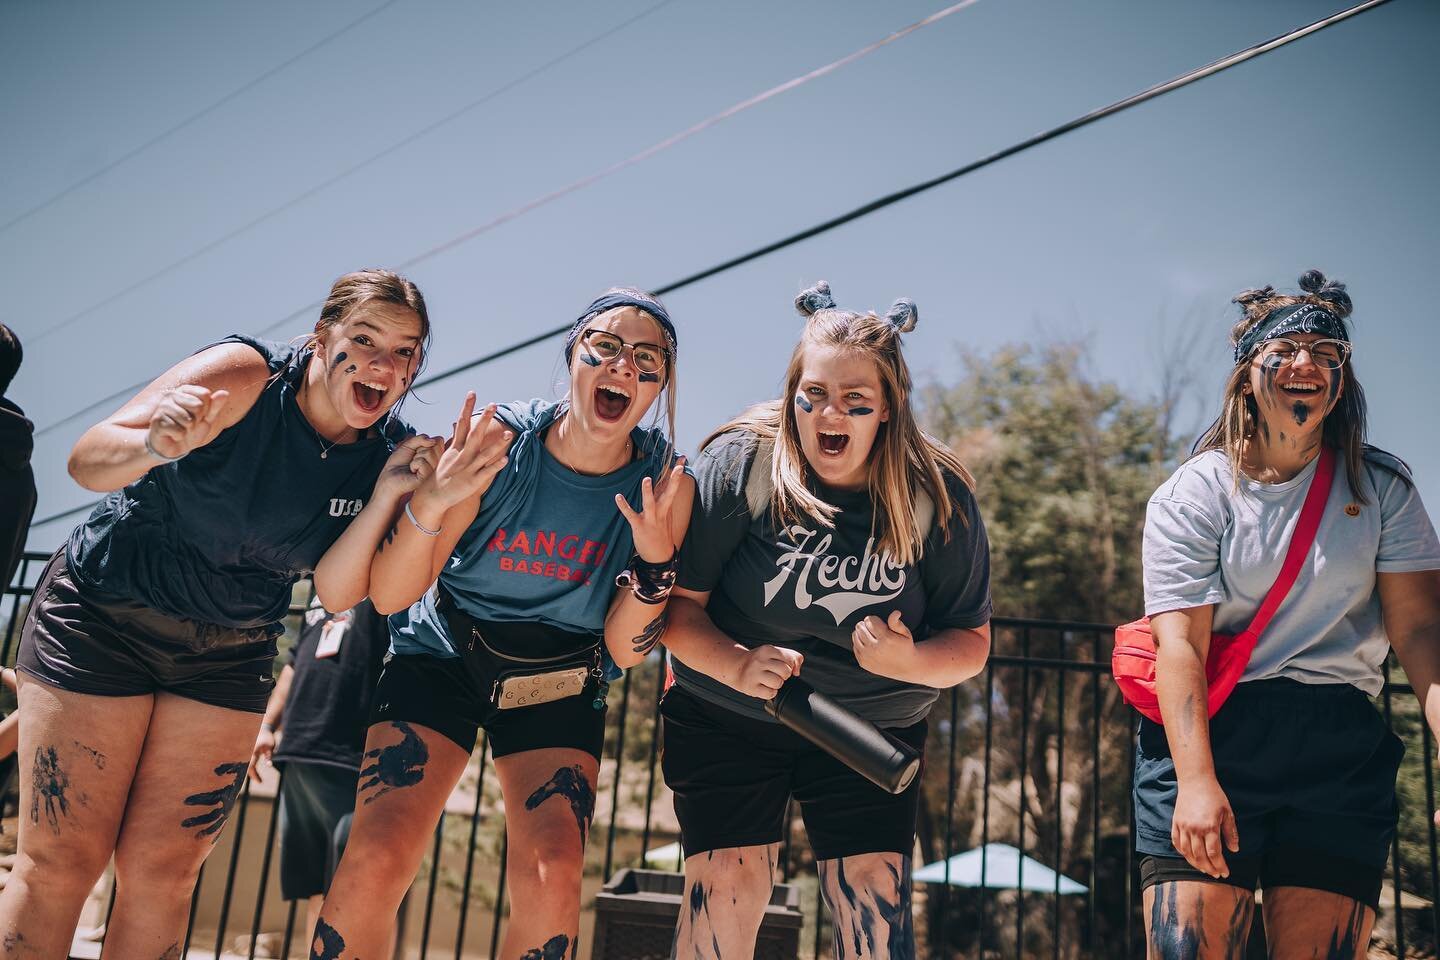 Tales from the Verde Valley:

&ldquo;God did so many things in each of these girls lives at camp and we are seeing crazy fruit from it. Each of them have been released in new levels of influence, power, and faith since we have been home. They have re